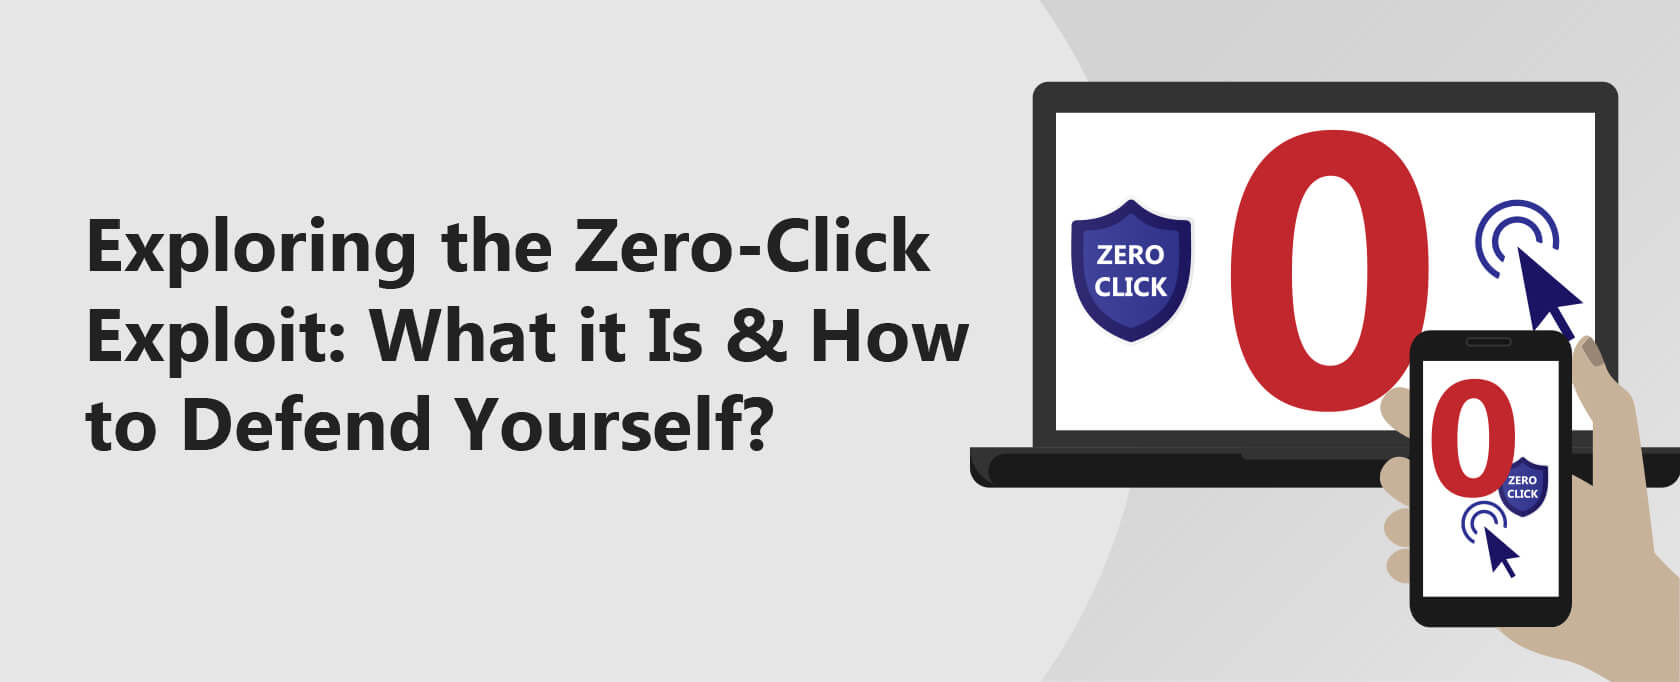 Exploring the Zero-Click Exploit: What it Is & How to Defend Yourself?